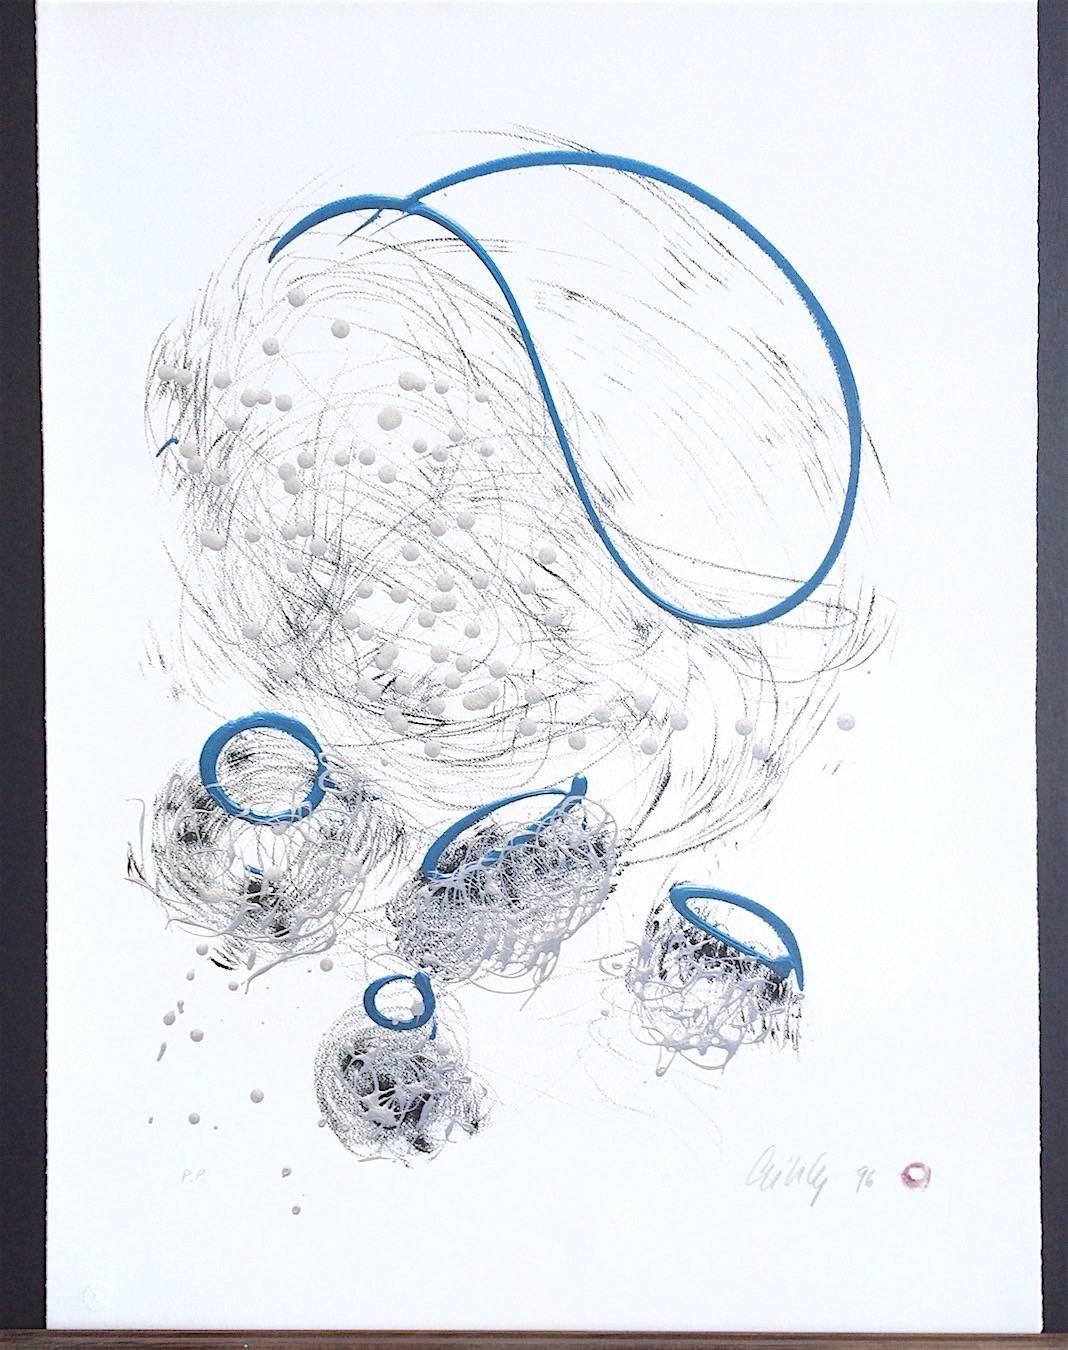 Basket Drawing, Signed Limited Edition Lithograph, Free Form Abstract - Print by Dale Chihuly